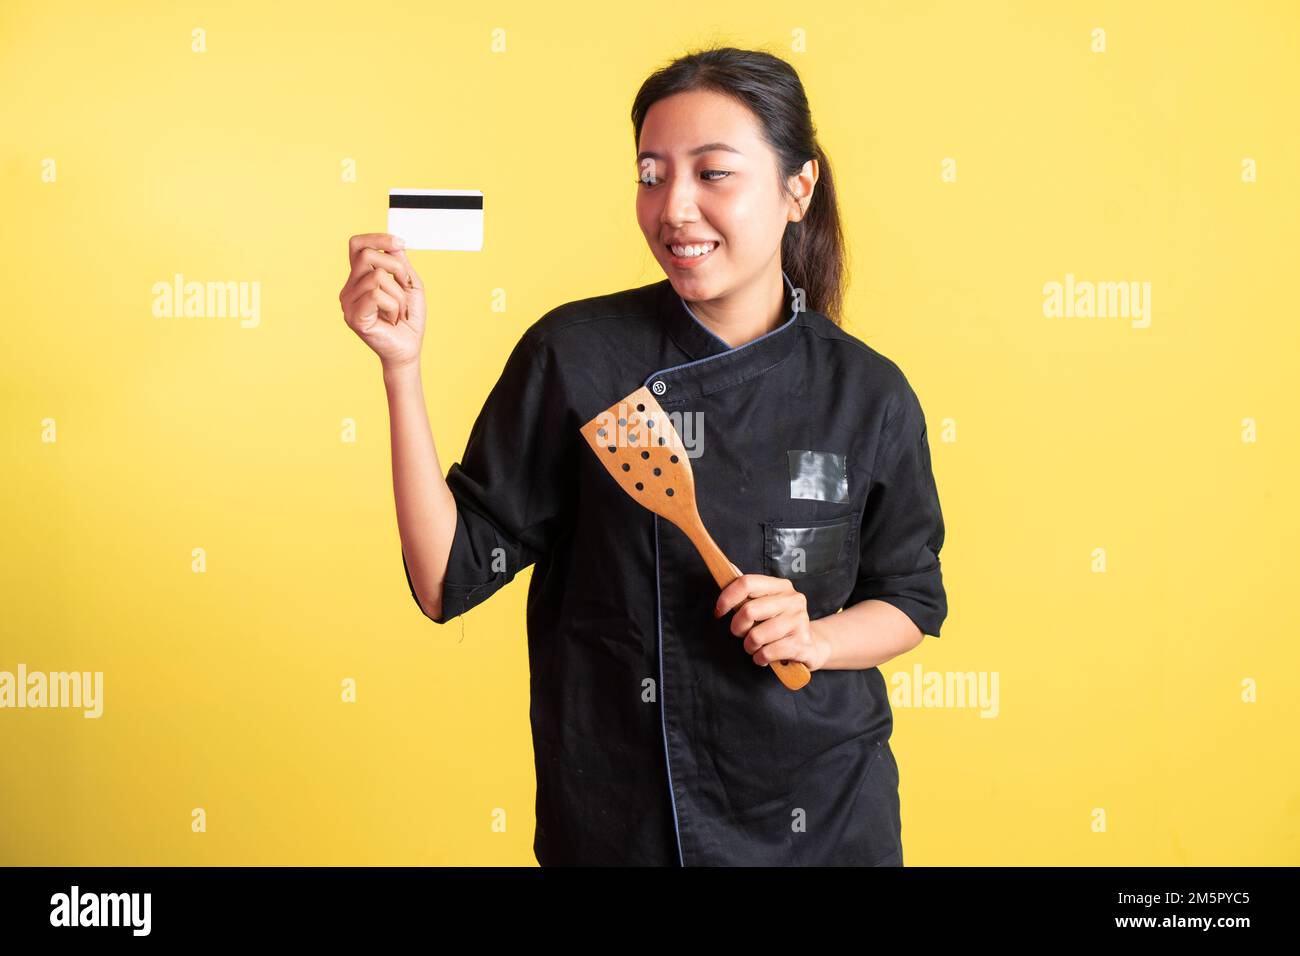 asian female chef showing atm card and holding spatula Stock Photo